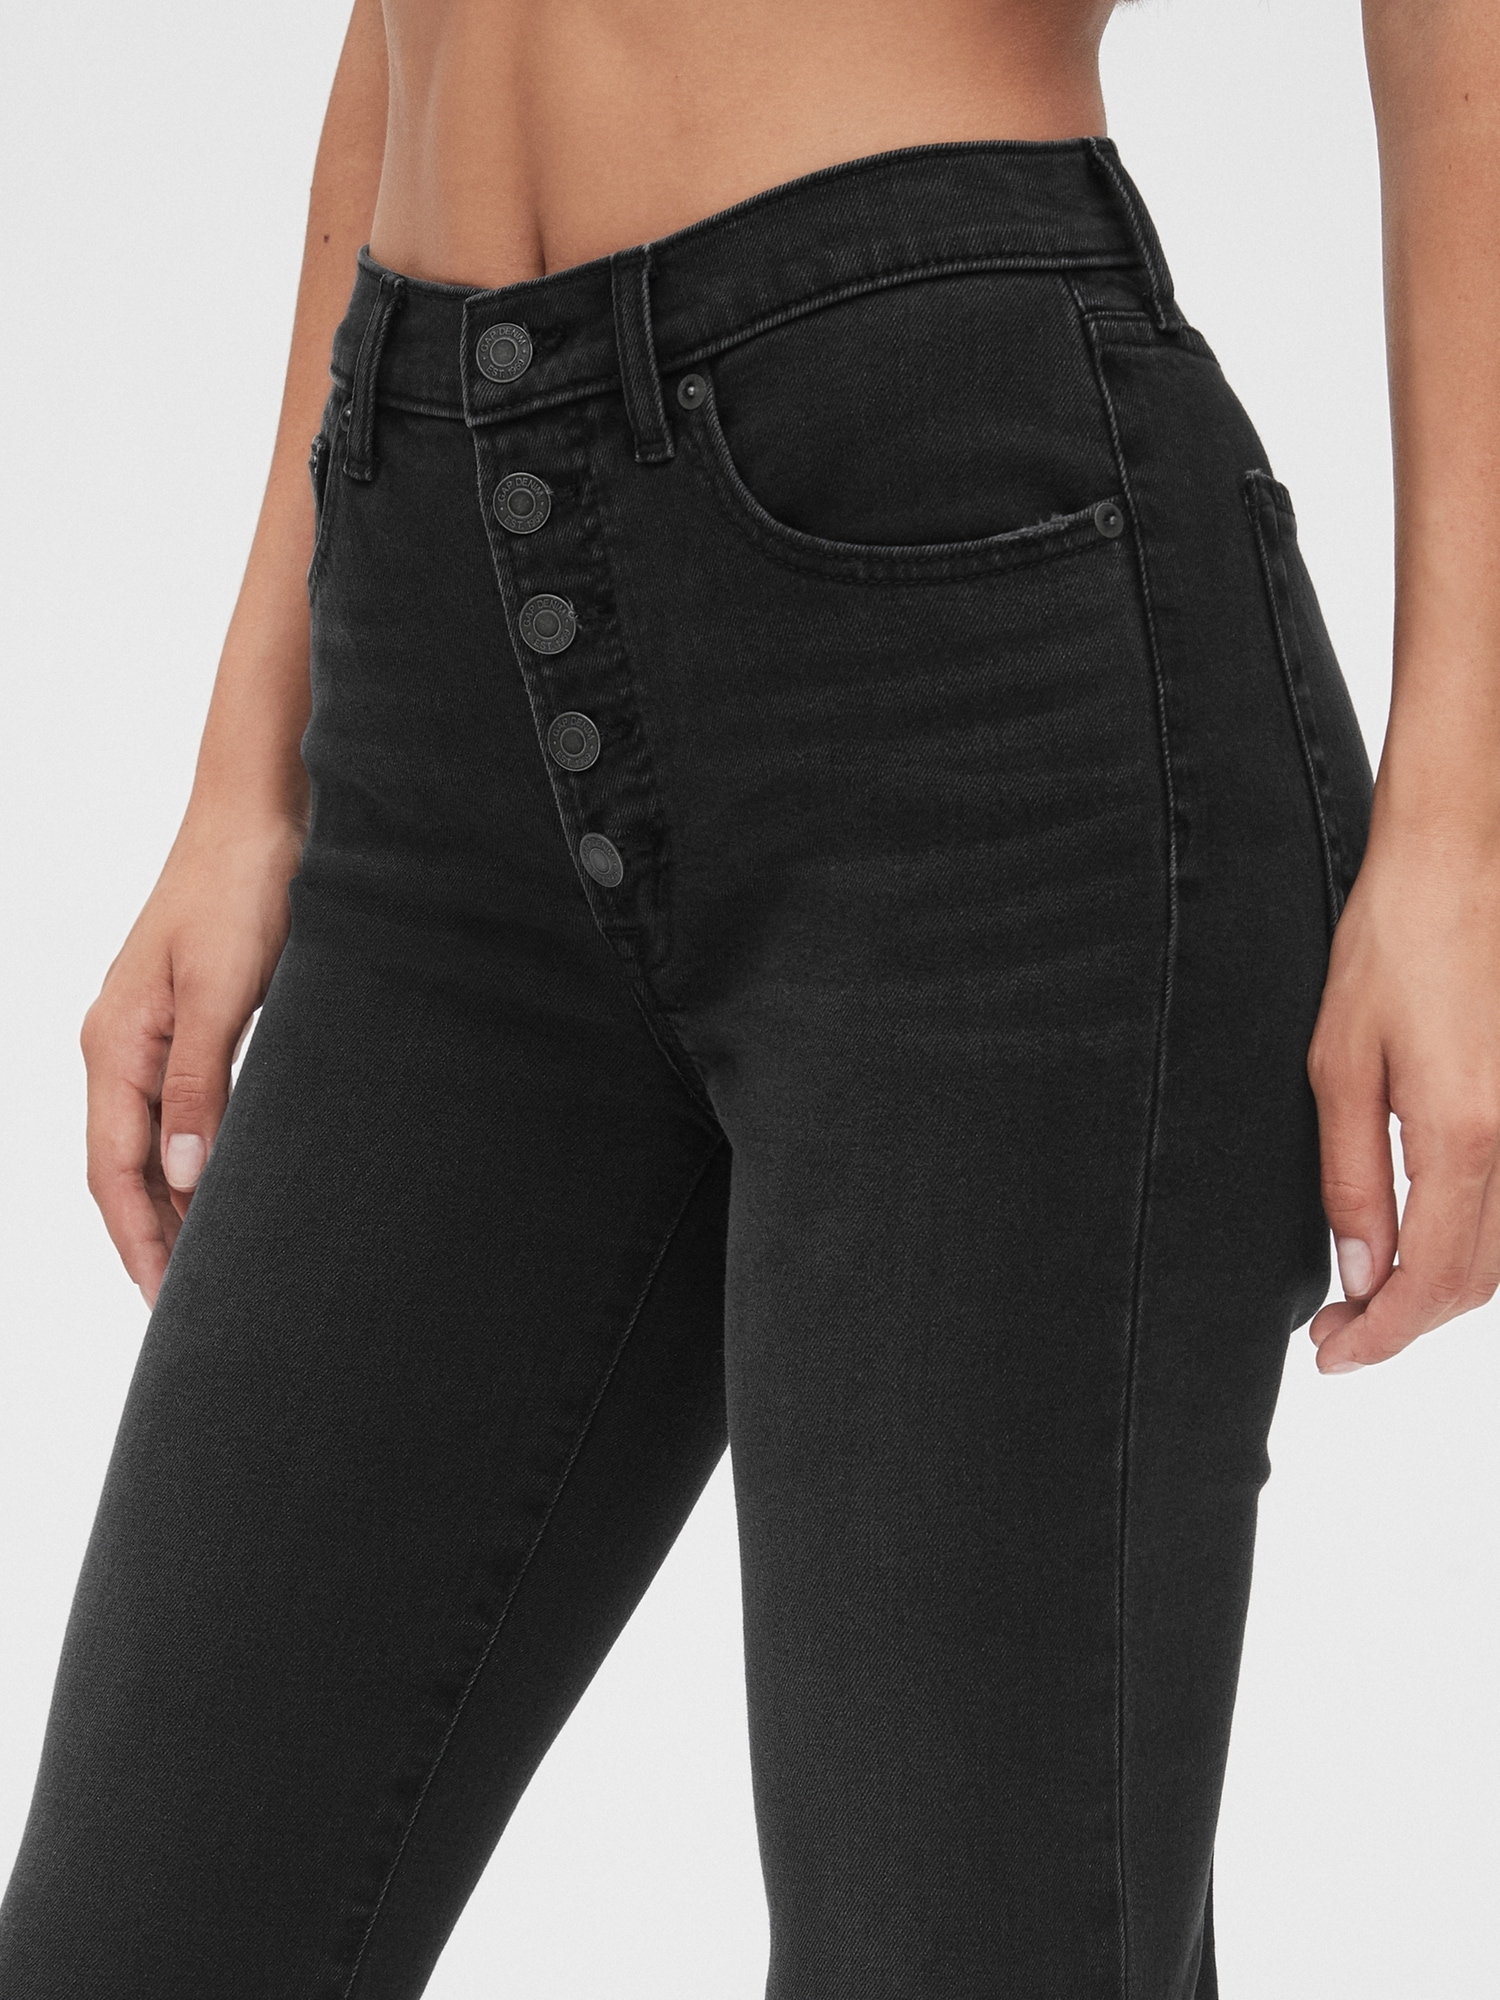 high waisted jeans button fly